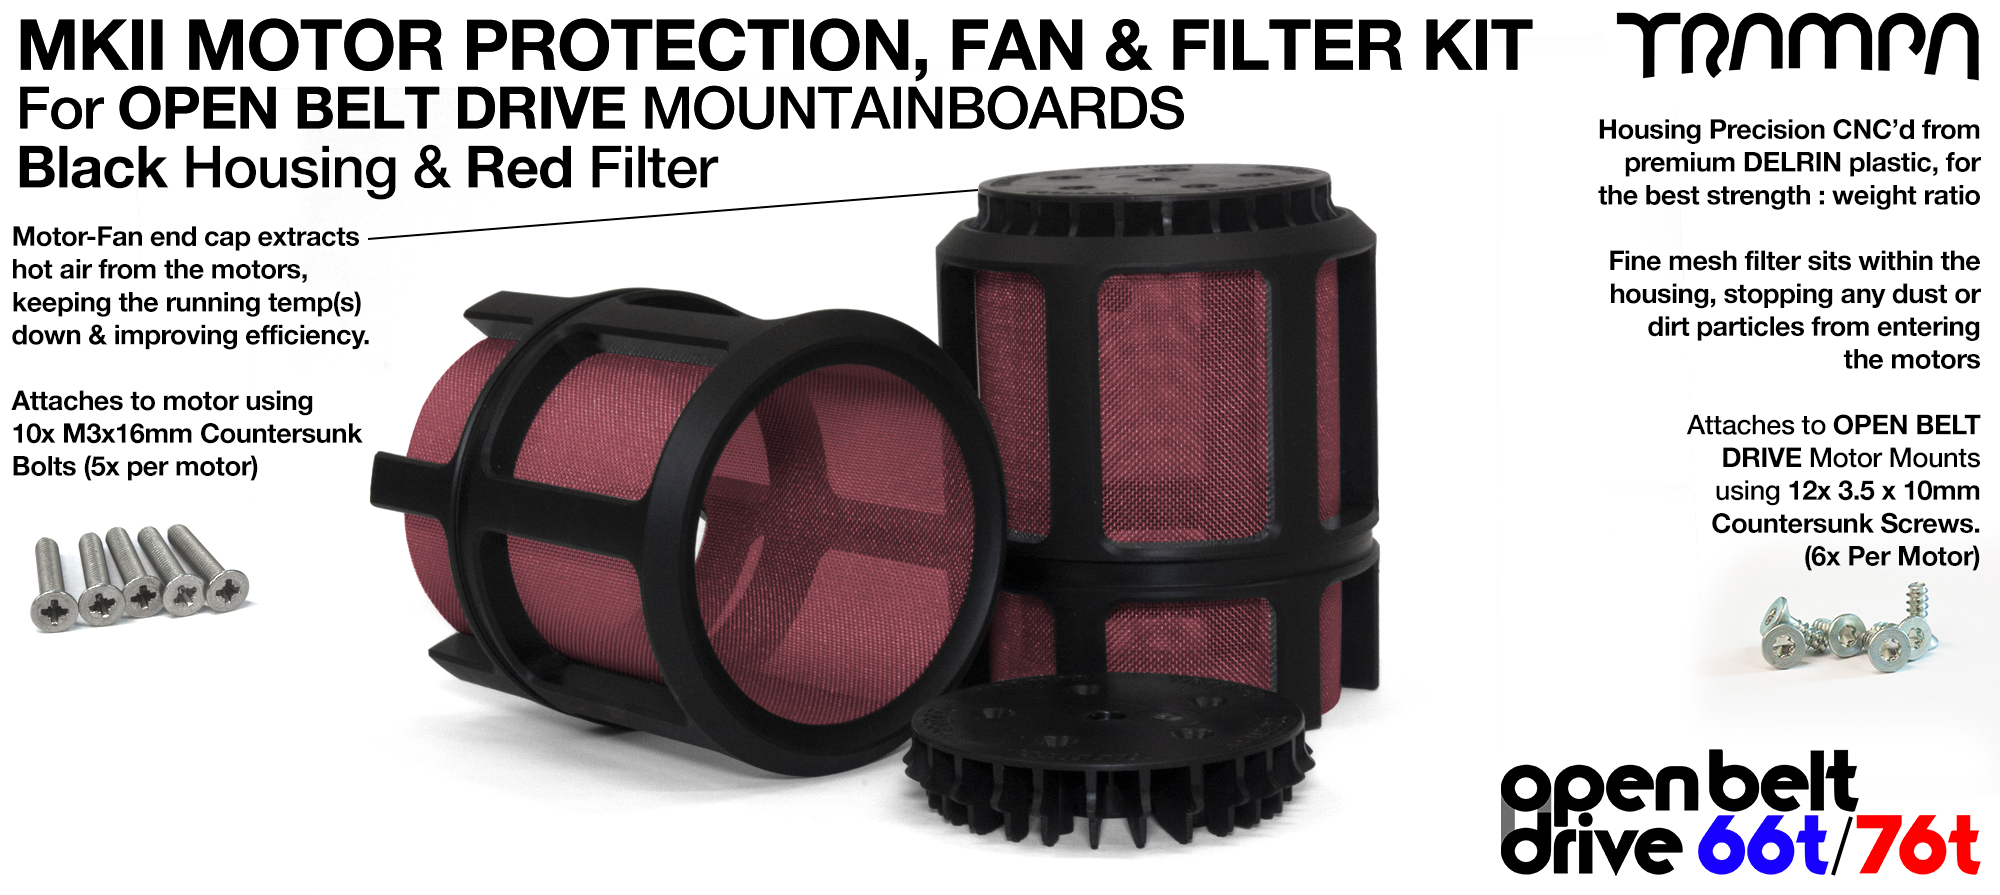 FULL Cage Motor Protection Filter & Fan - RED 